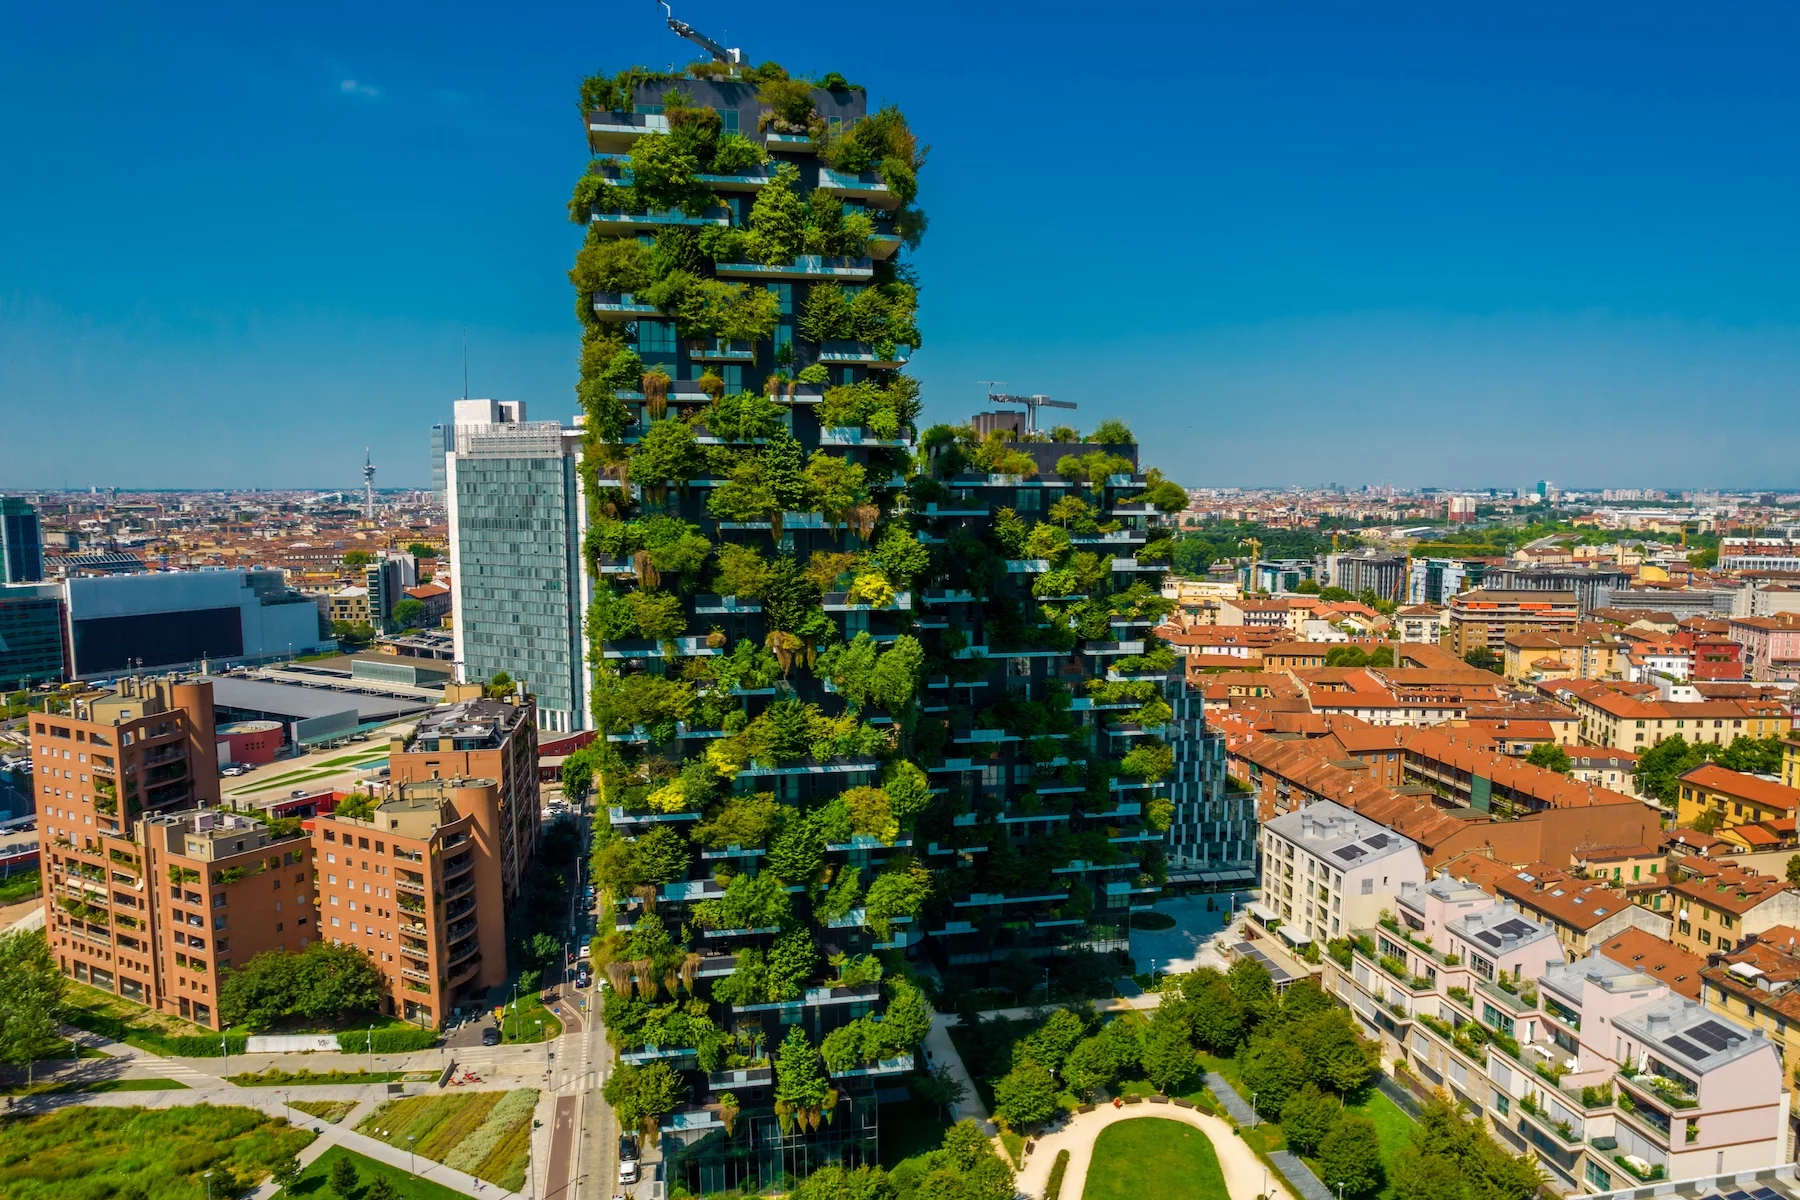 Two modern apartment buildings covered in greenery stand tall against the Milan skyline